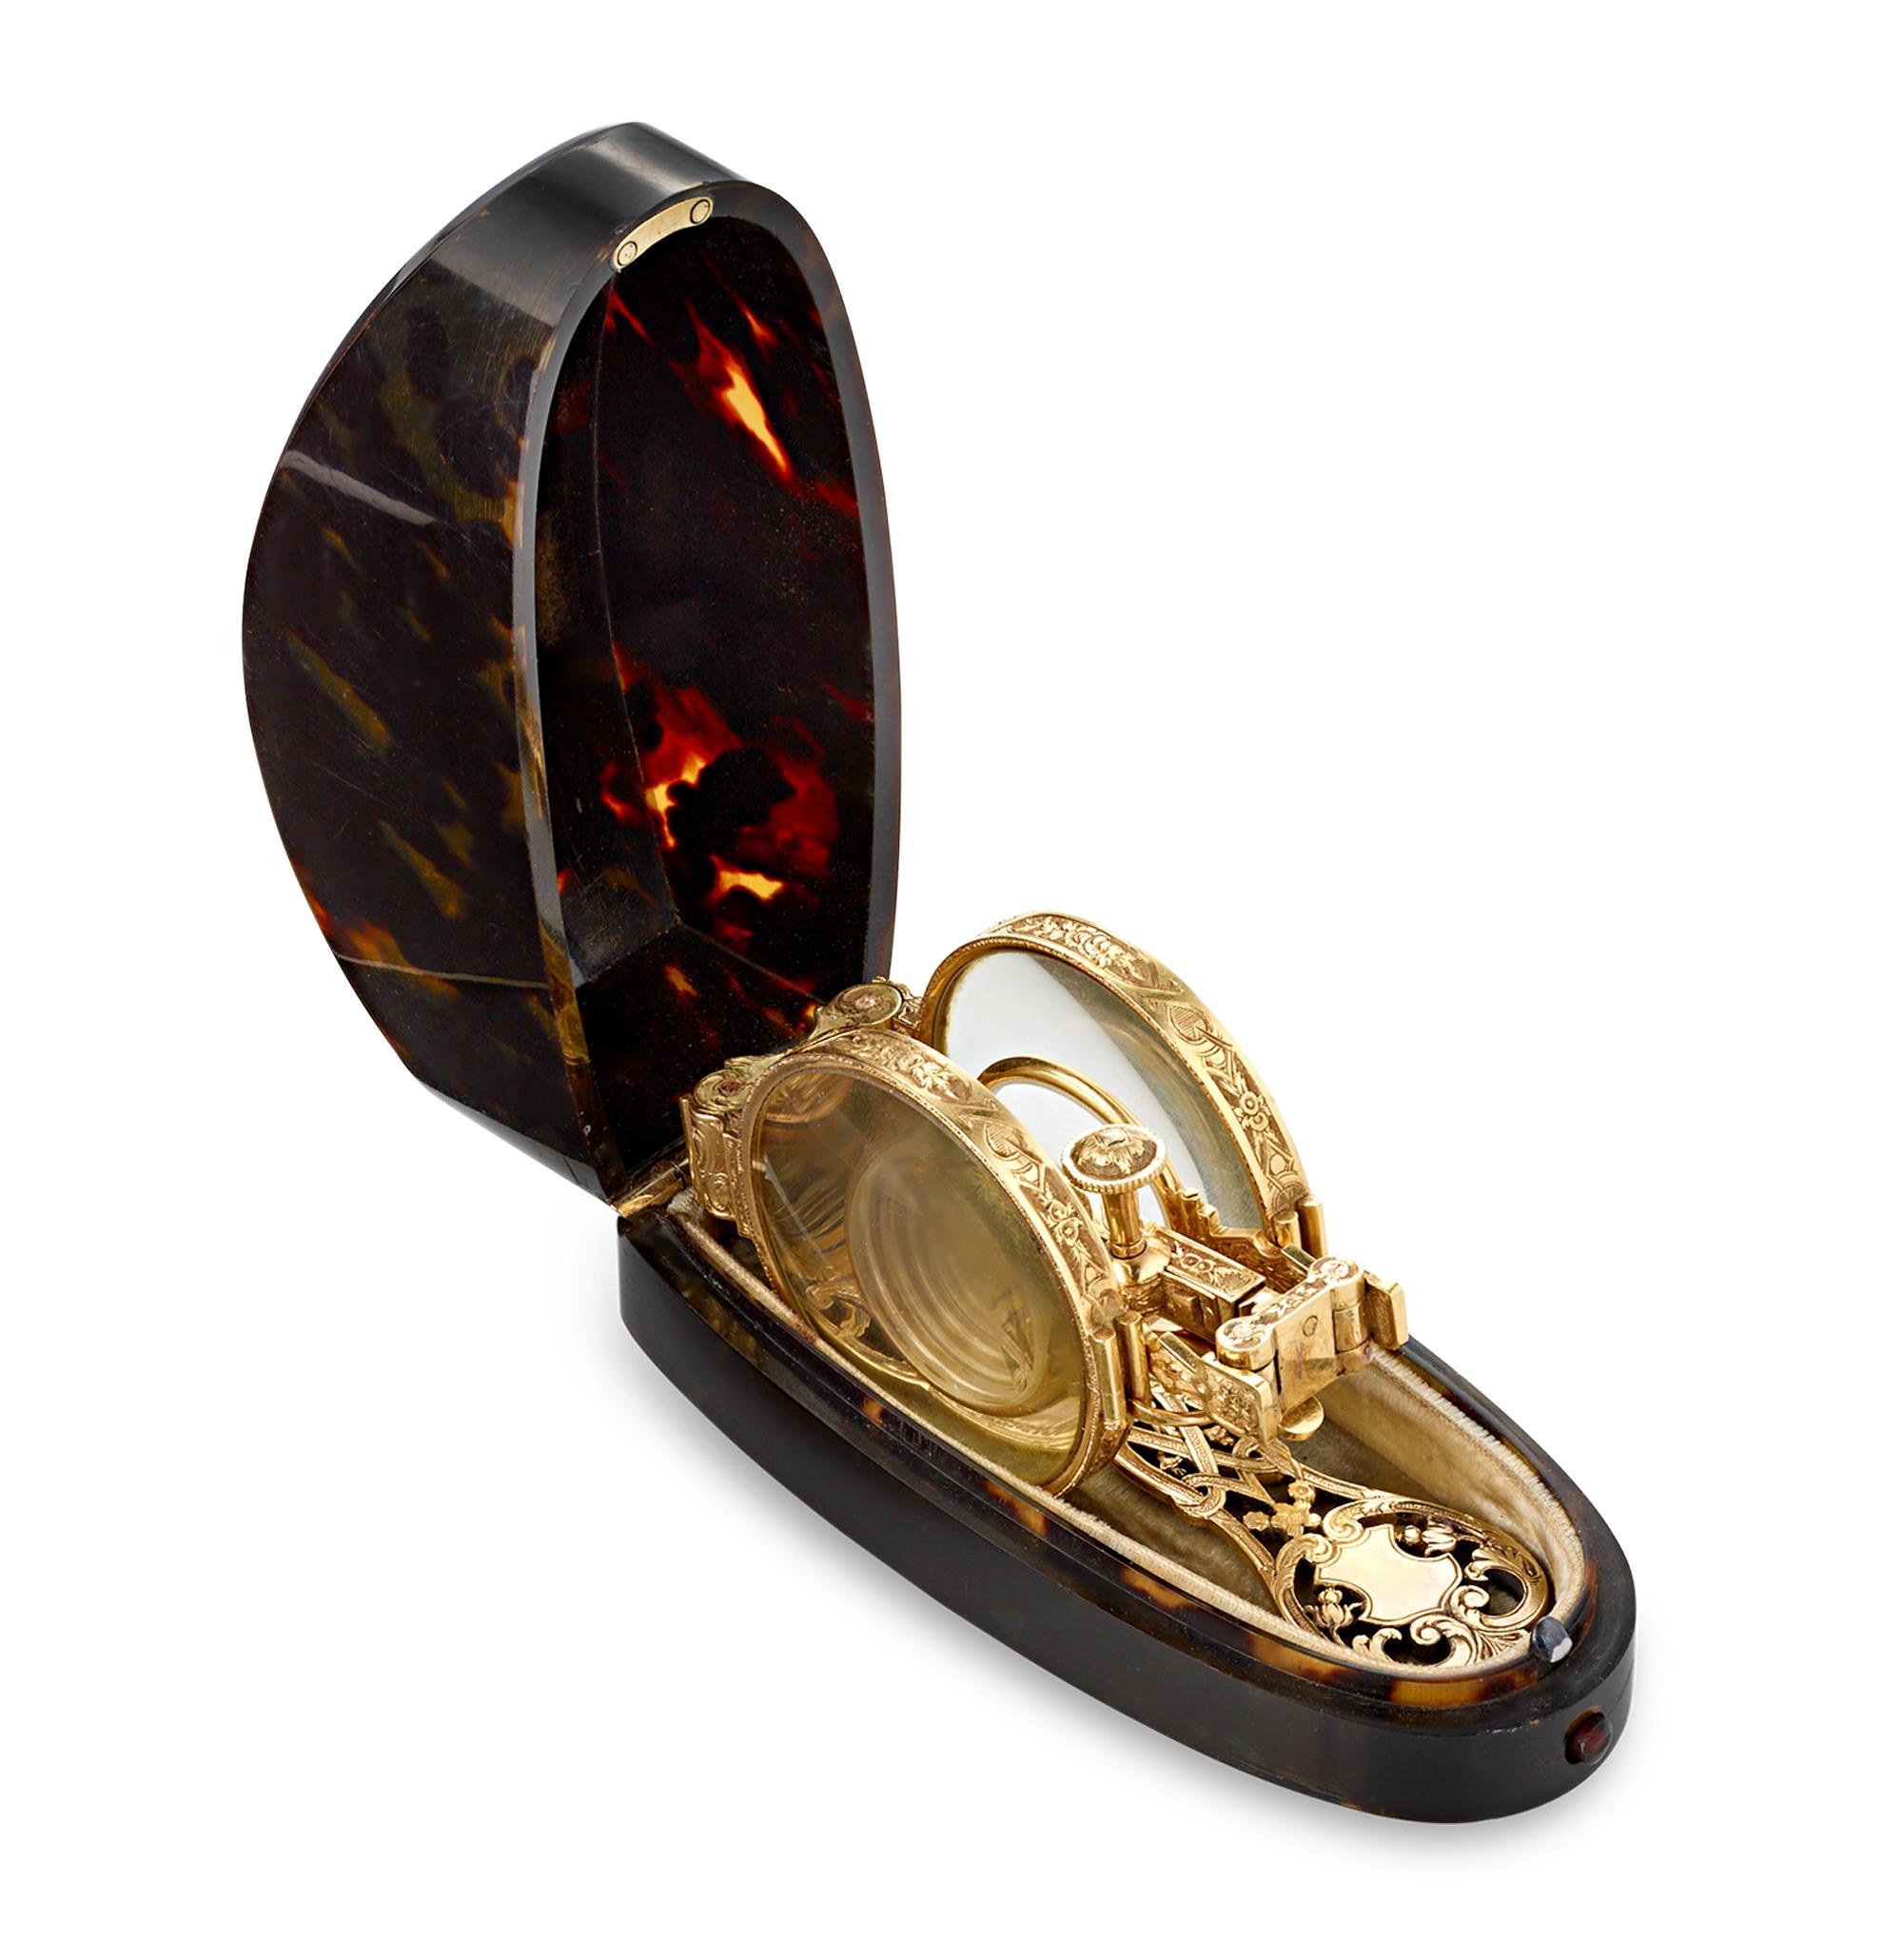 Engraved French Metamorphic Opera Glasses, 18K Gold For Sale